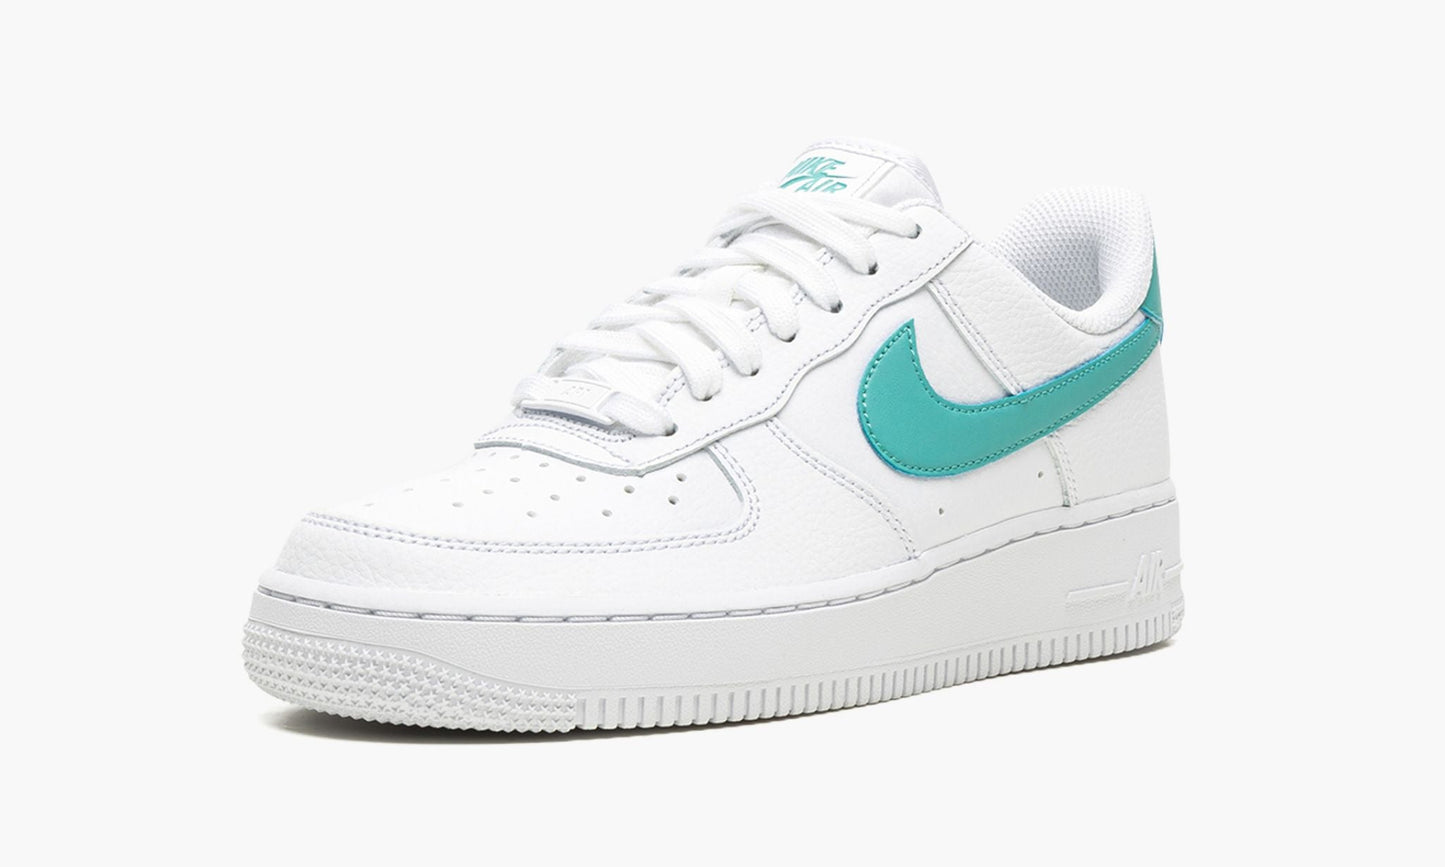 Nike Air Force 1 Low "White Washed Teal"